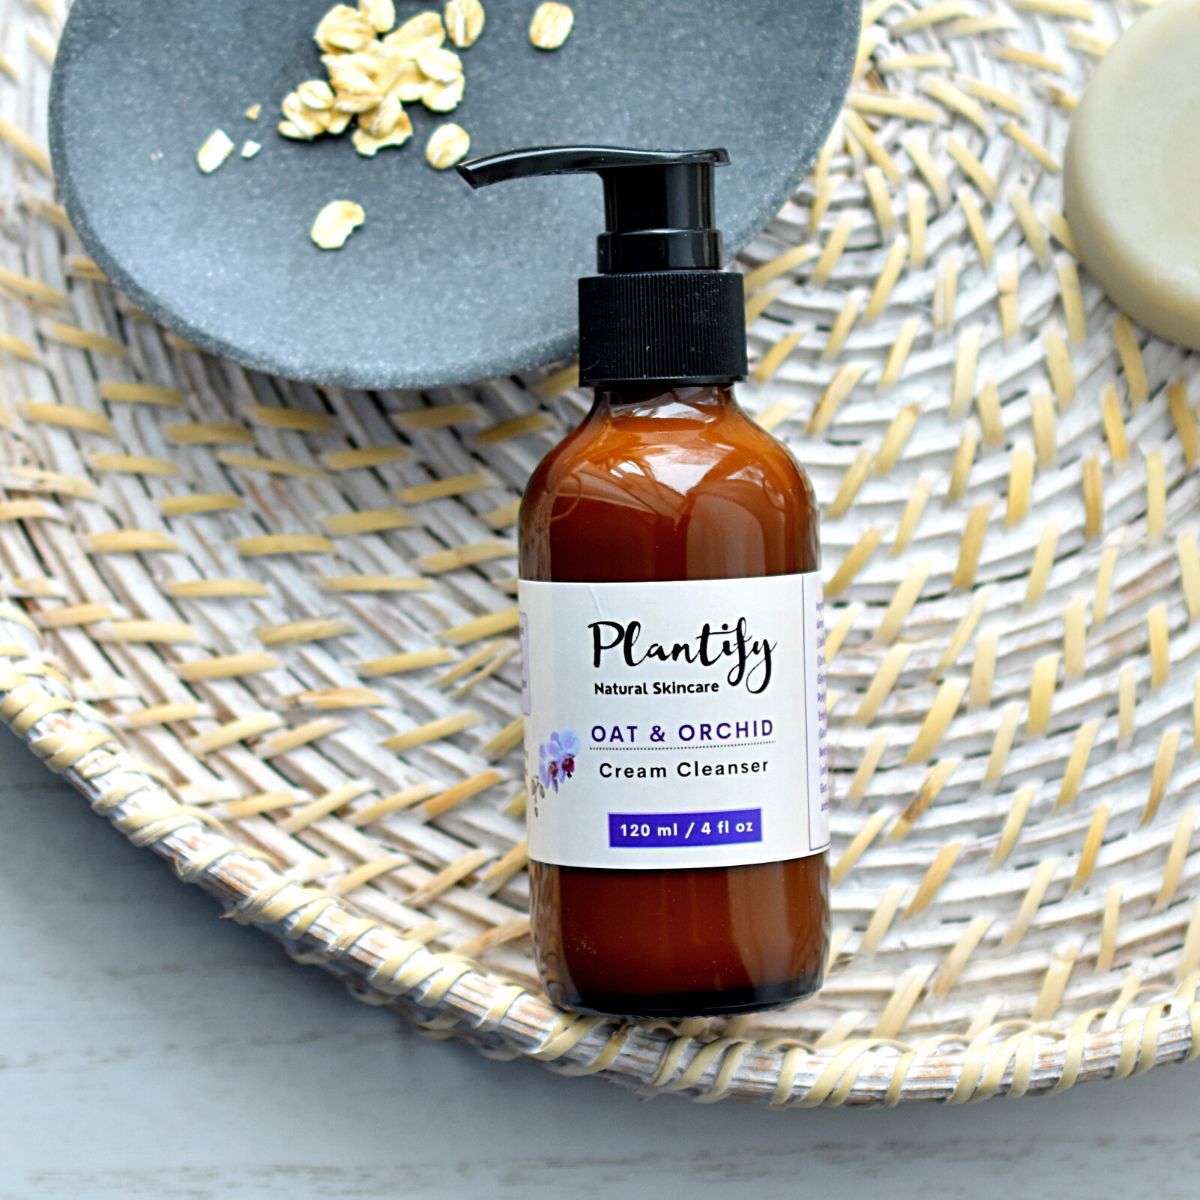 Oat & Orchid Cream Cleanser - Plantify Natural Skincare